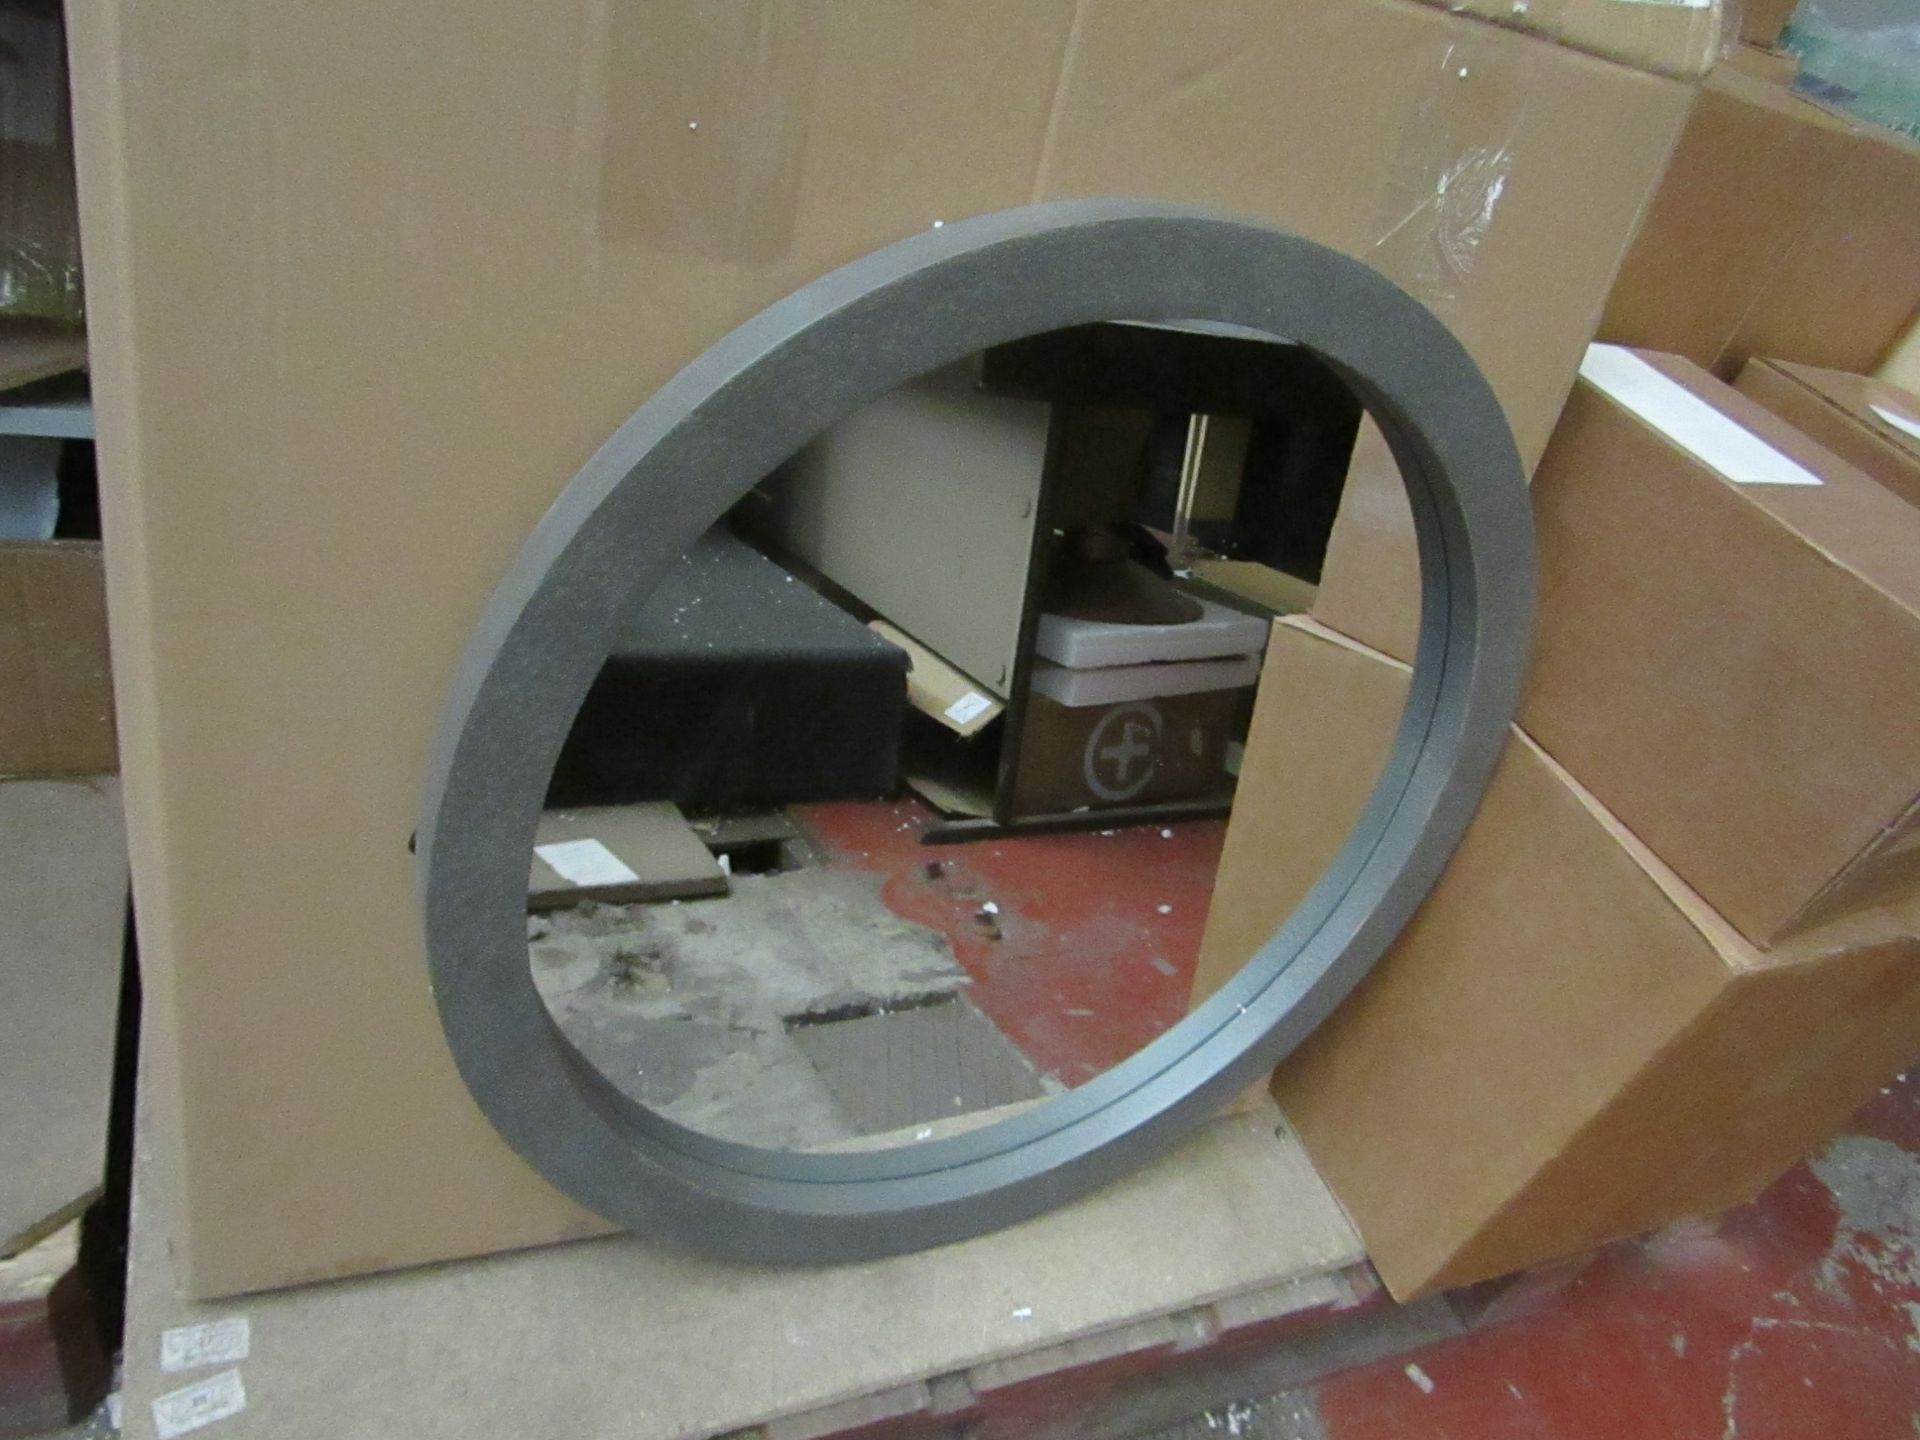 | 1X | COX & COX HALDEN MIRROR | HAS A SMALL MARK ON THE GLASS & BOXED | RRP £175 |